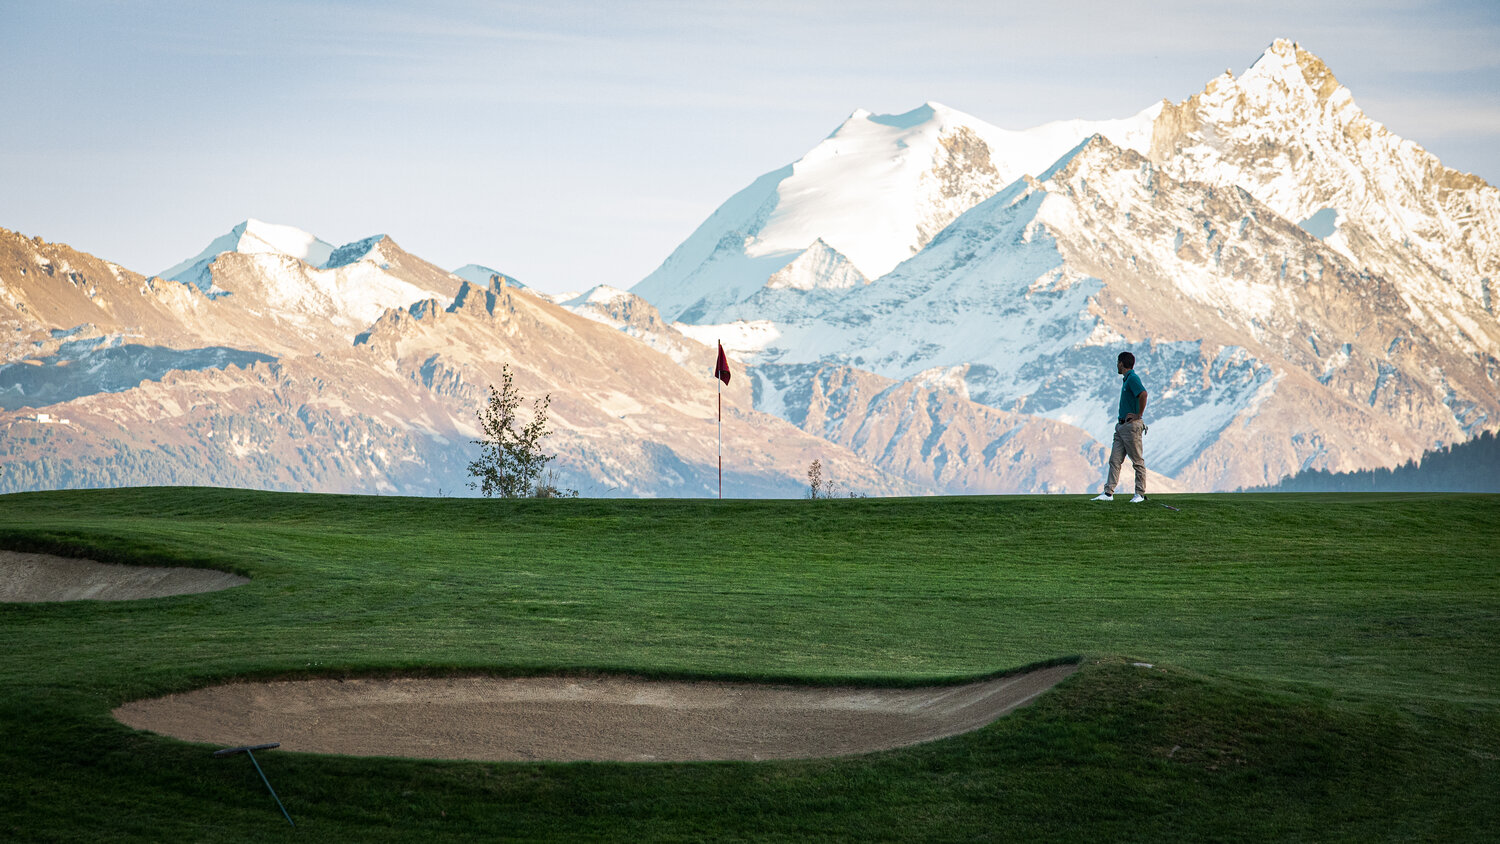 The iconic par-4 7th hole at Switzerland's Crans-Sur-Sierre Golf Club, home of the Omega European Masters.